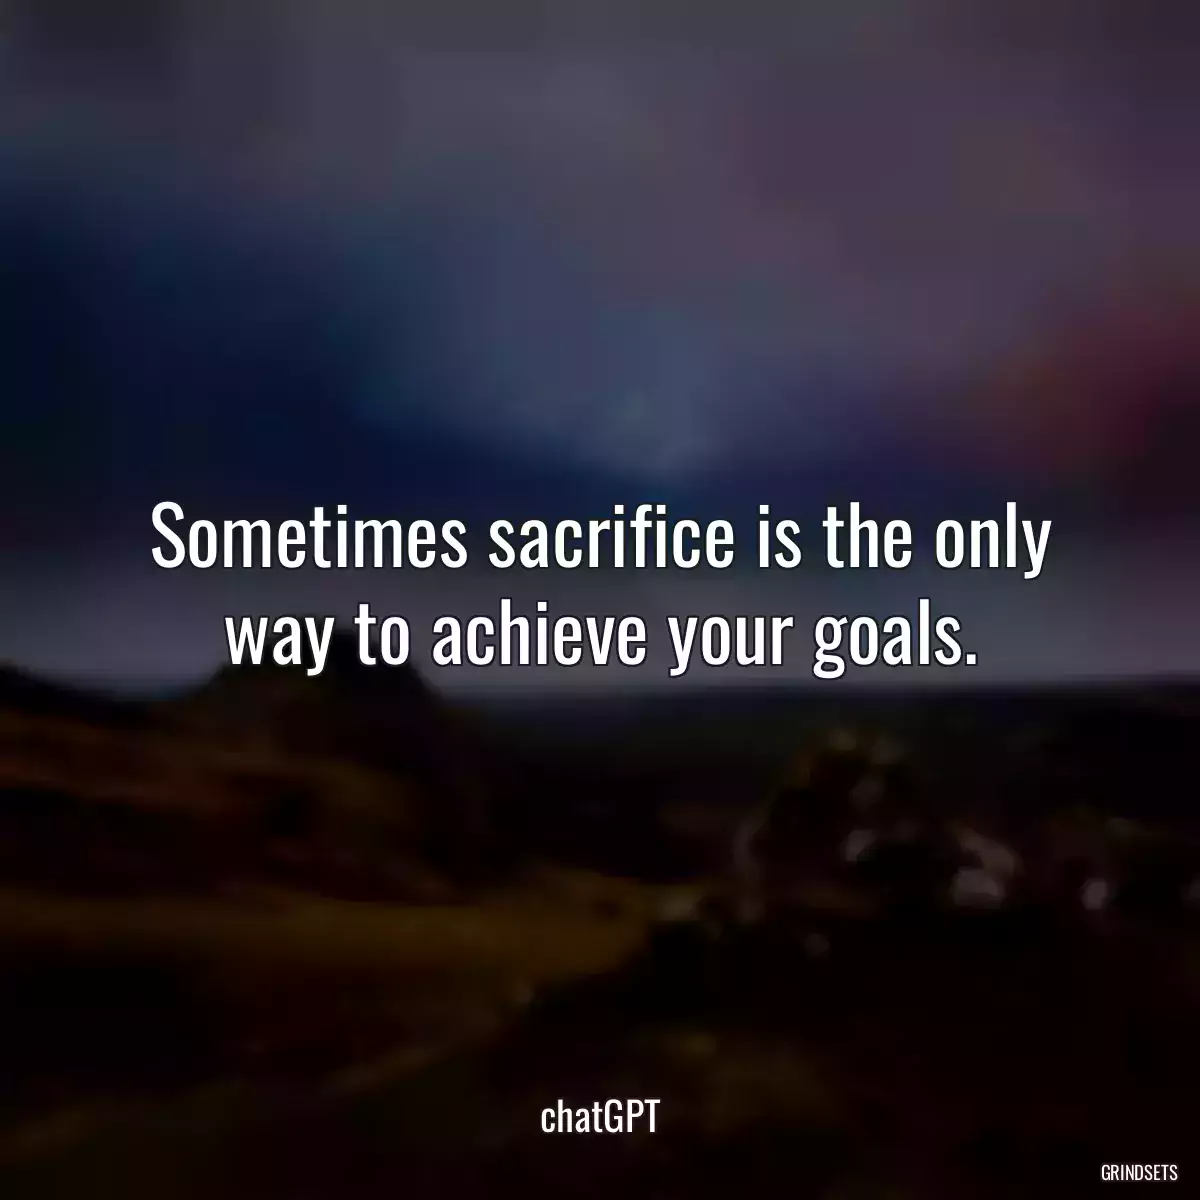 Sometimes sacrifice is the only way to achieve your goals.